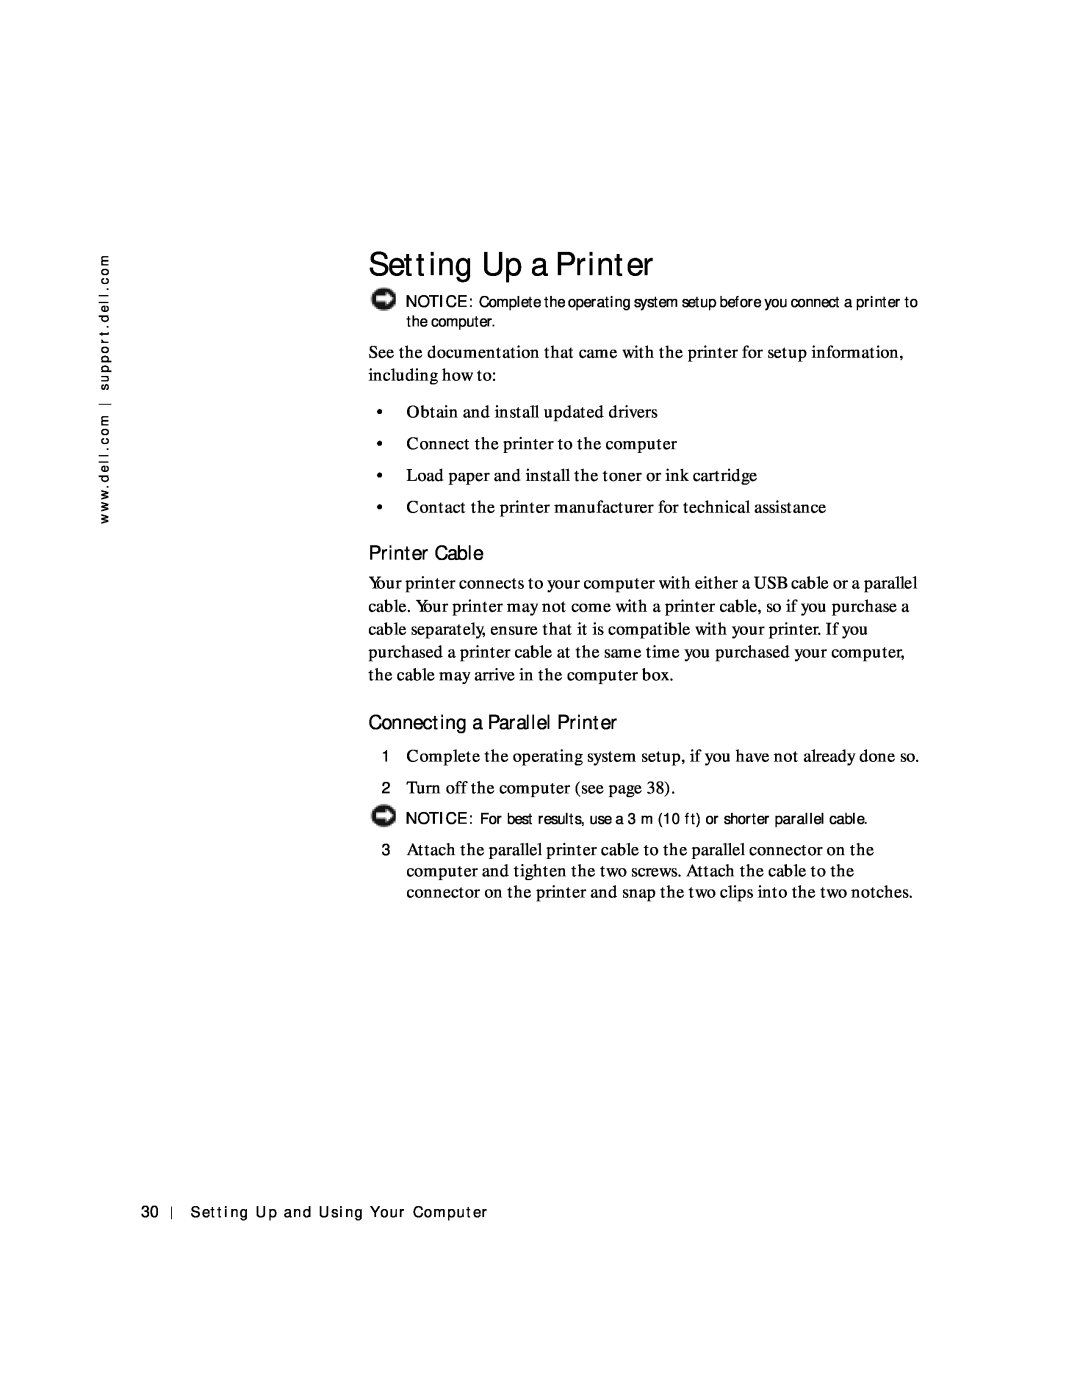 Dell 4150 owner manual Setting Up a Printer, Printer Cable, Connecting a Parallel Printer 